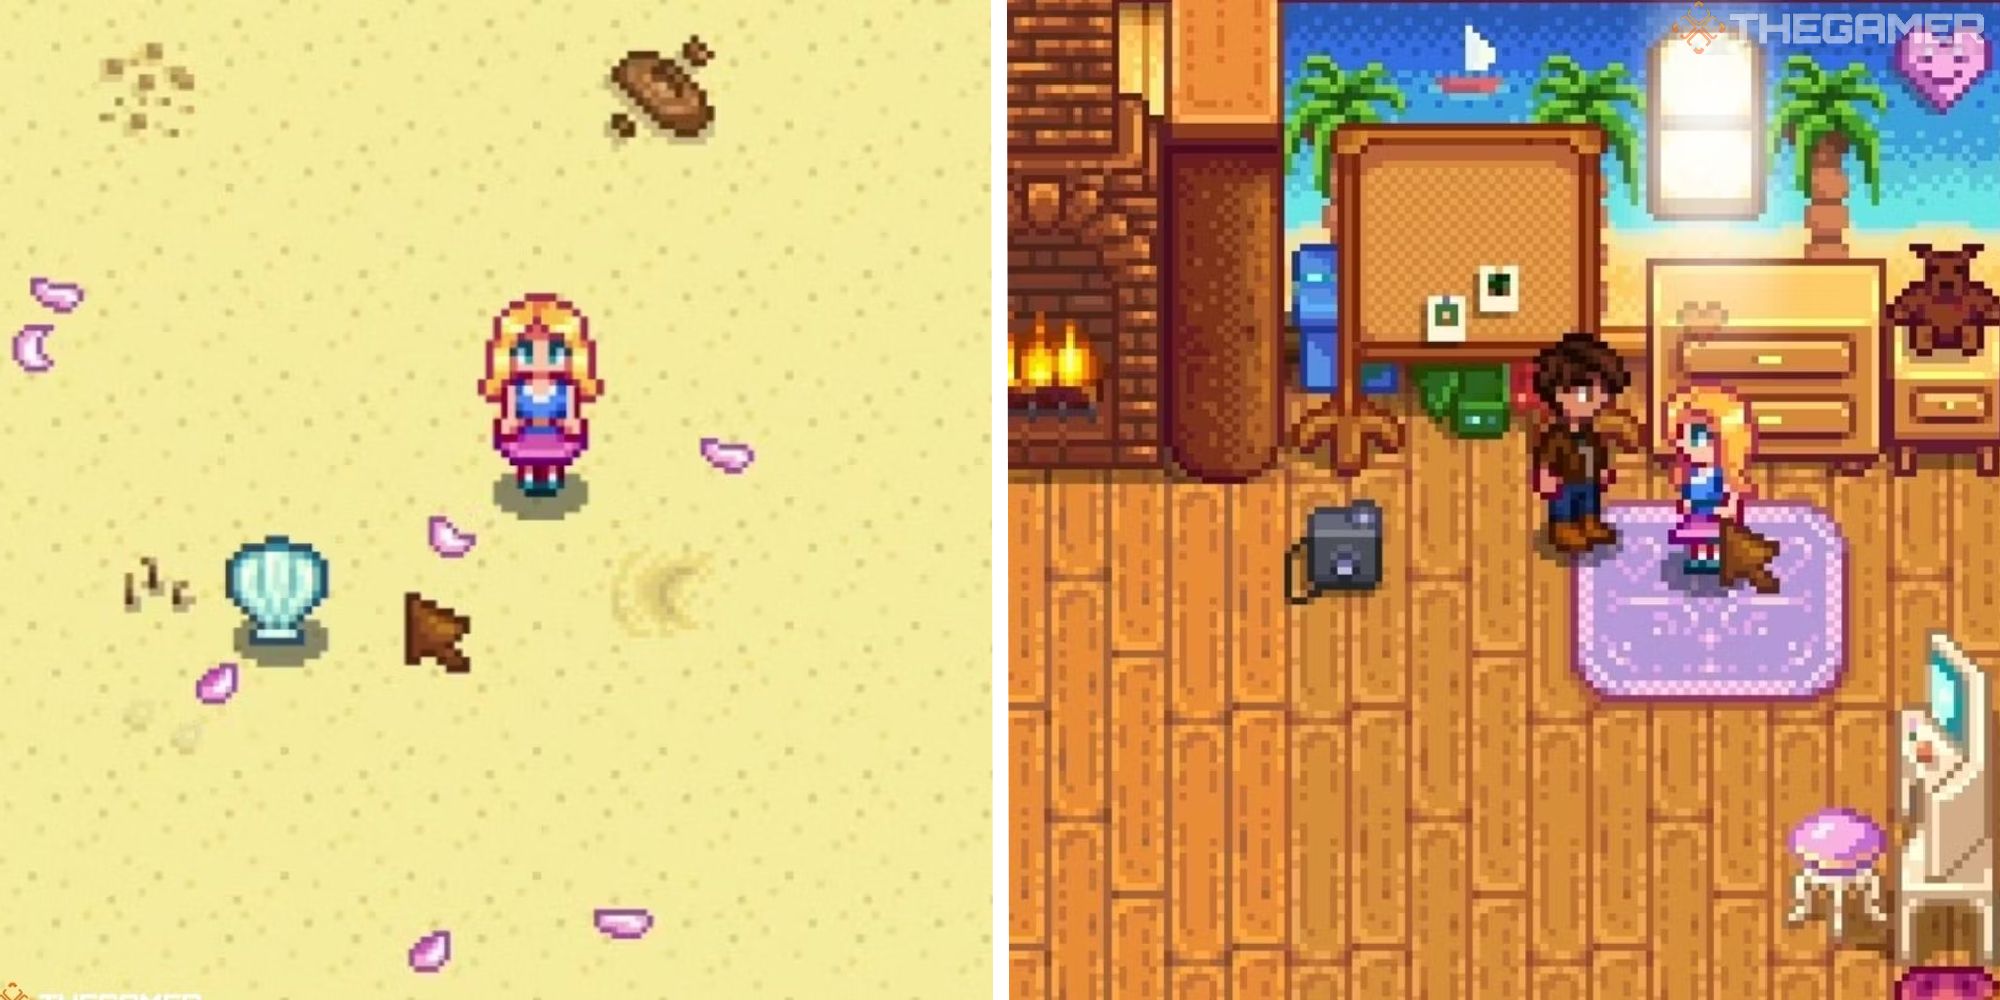 split image showing haley on beach next to image of haley and player in her spouse room